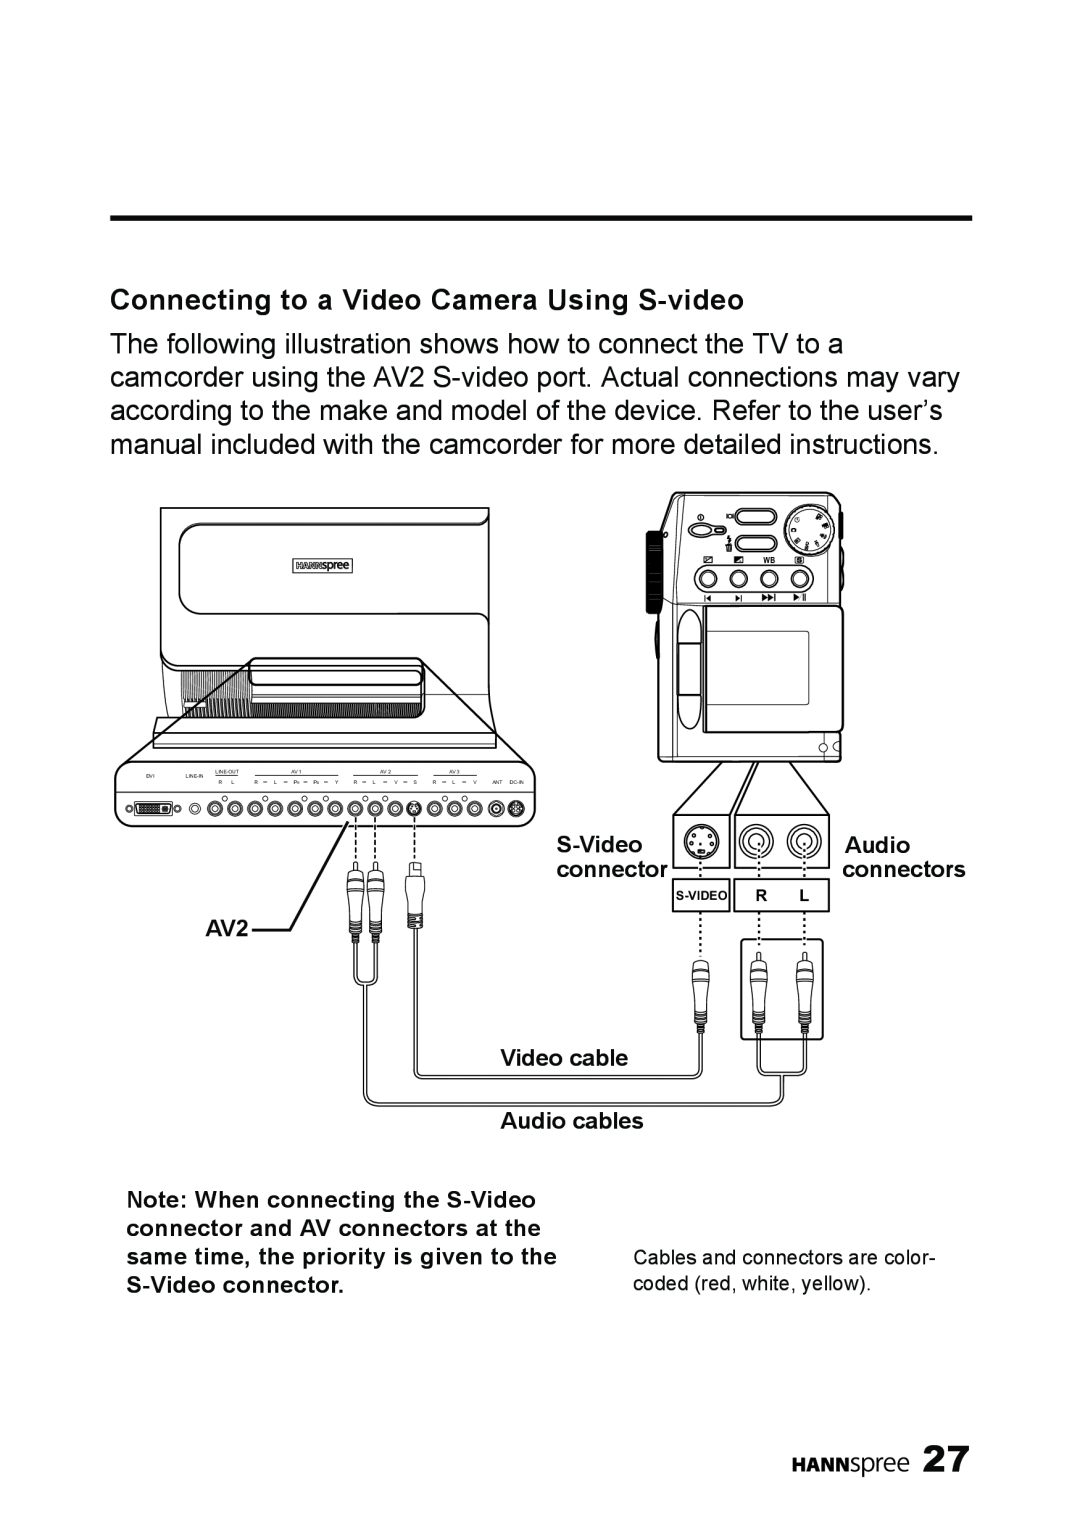 HANNspree LT11-23A1 user manual Connecting to a Video Camera Using S-video 